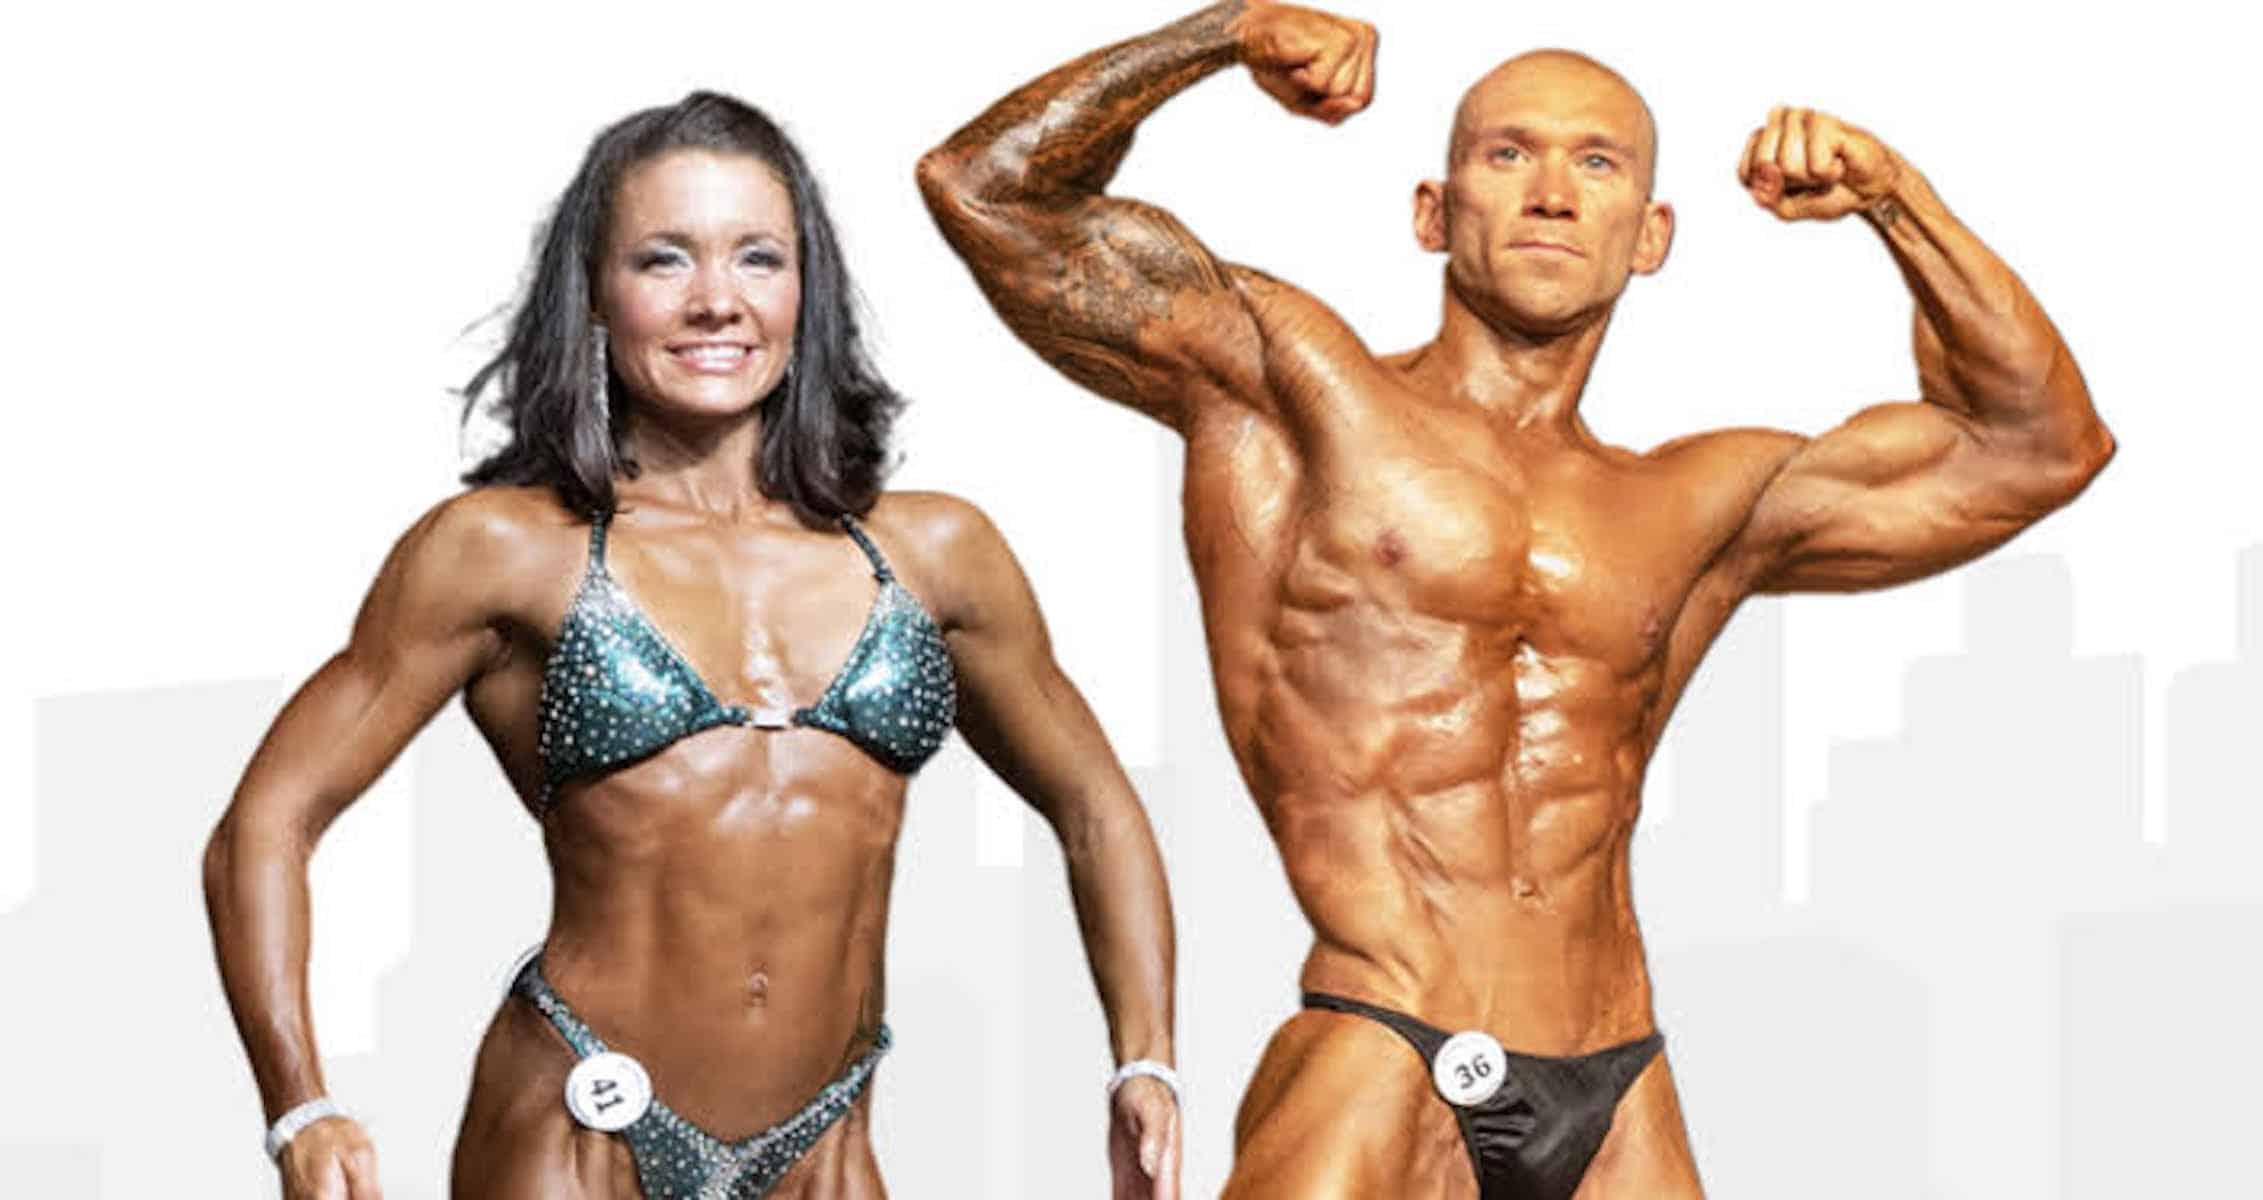 Fort Lauderdale’s Vegan Health And Fitness Expo To Host First Bodybuilding Competition